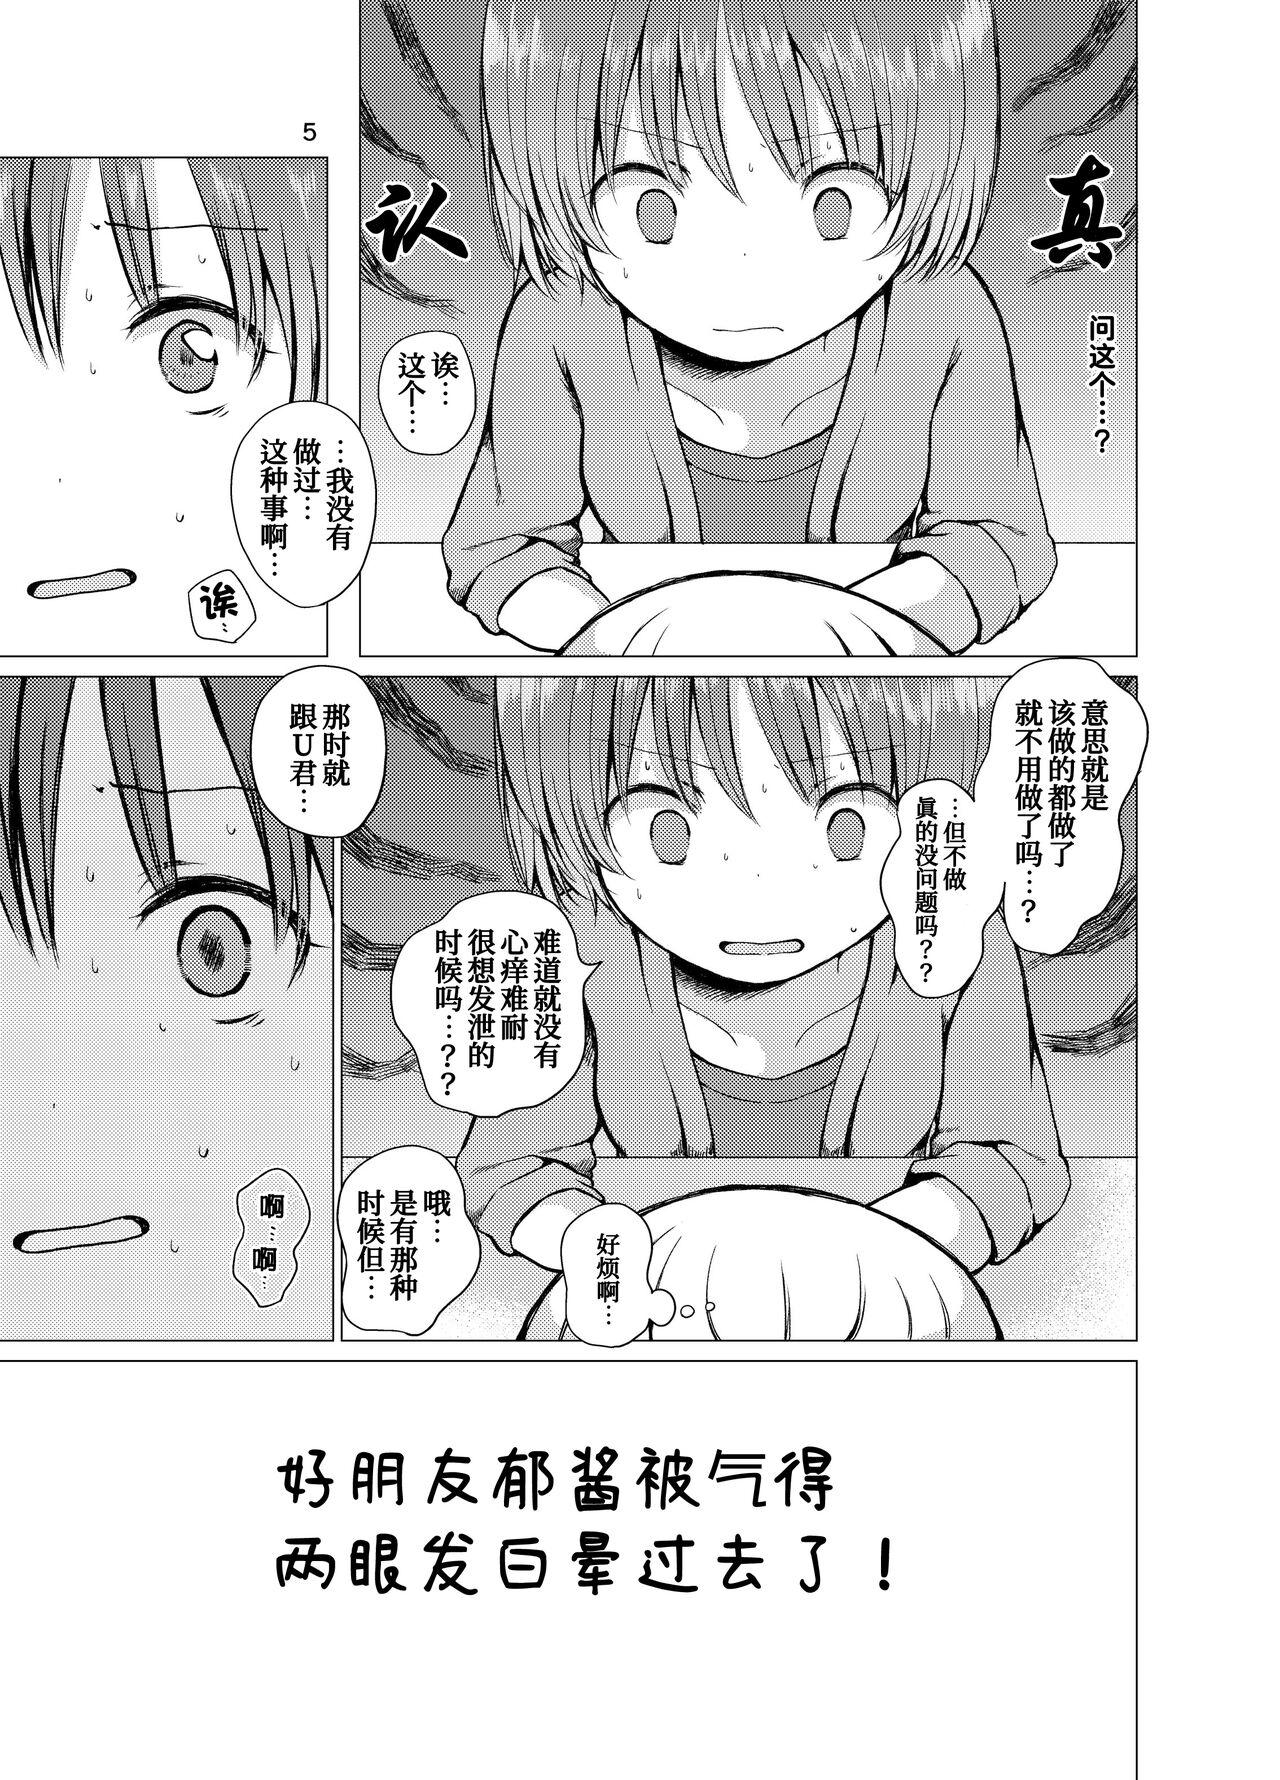 Red Handousei 3 Solo Girl - Page 6